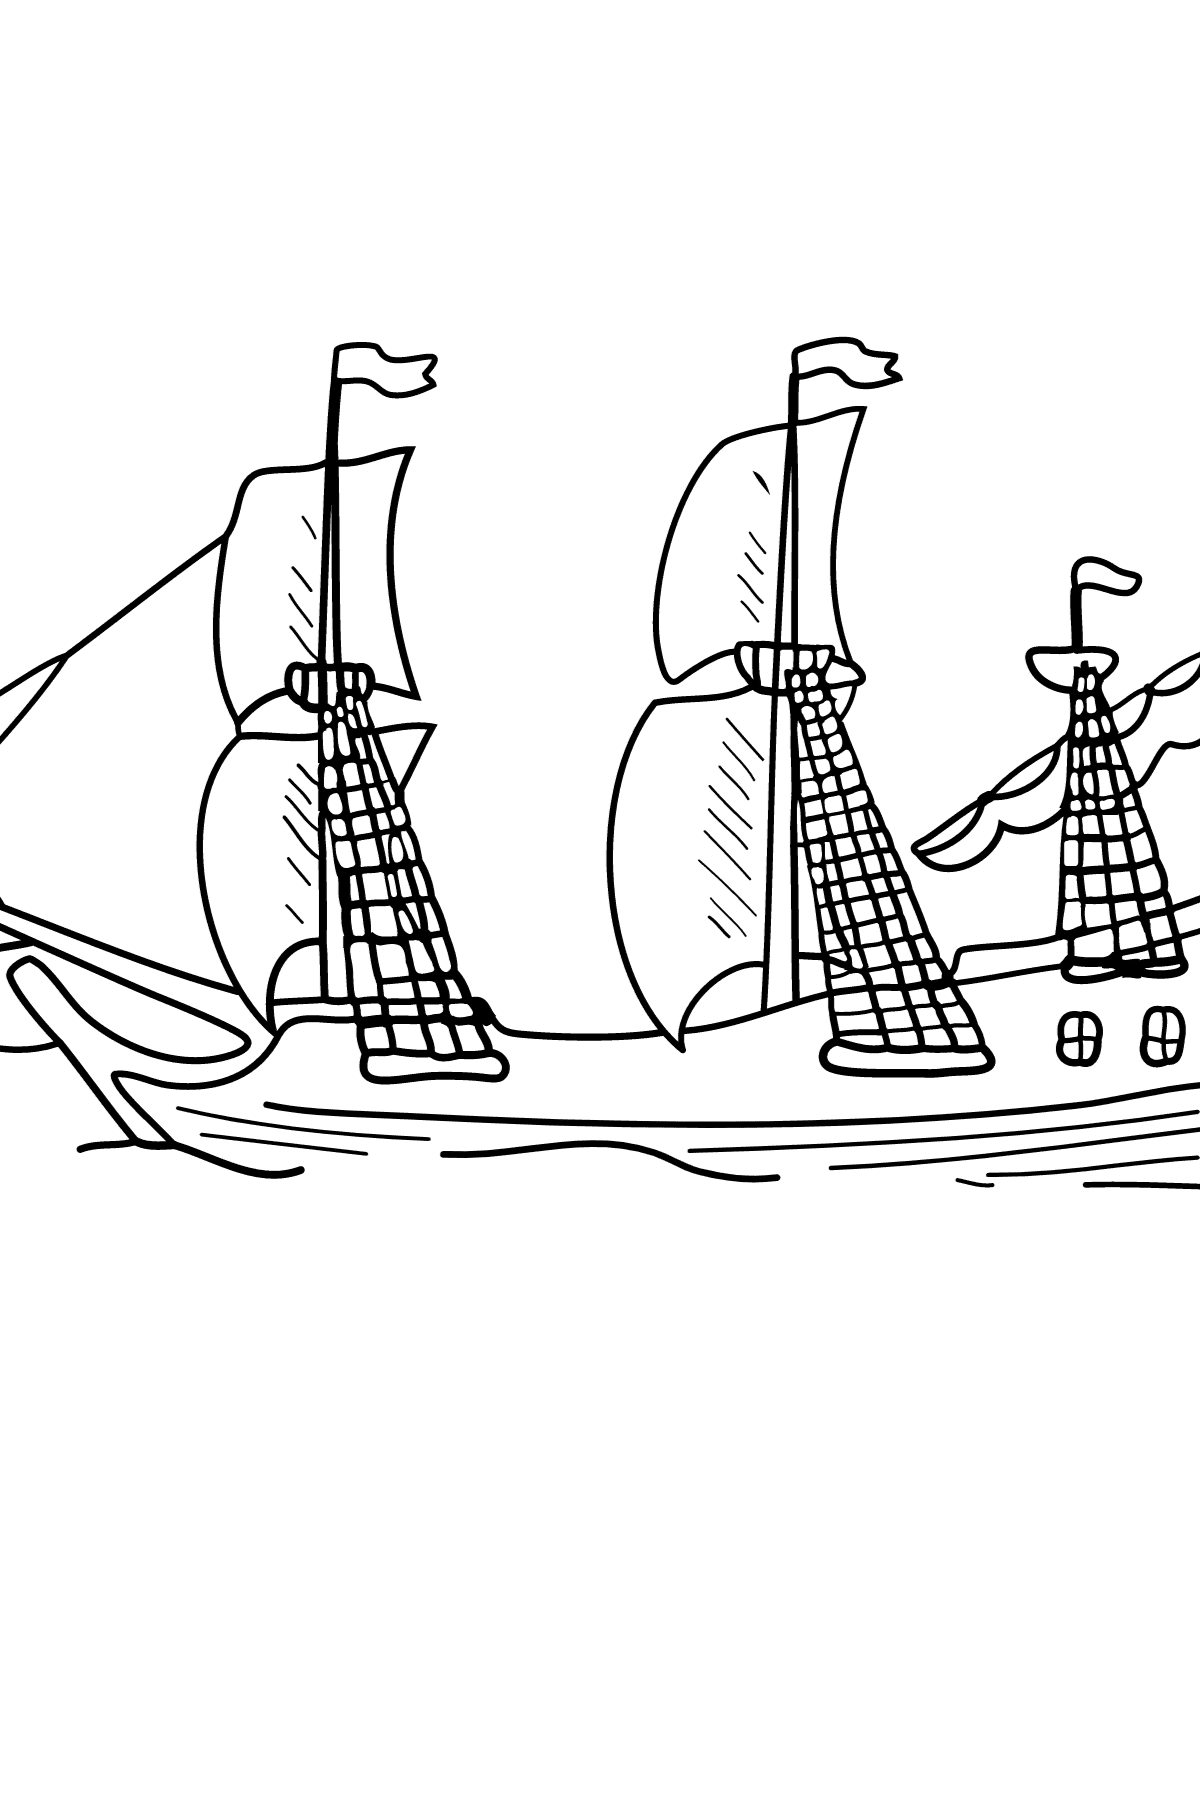 Coloring Page - A Galleon with Sails - Coloring Pages for Children